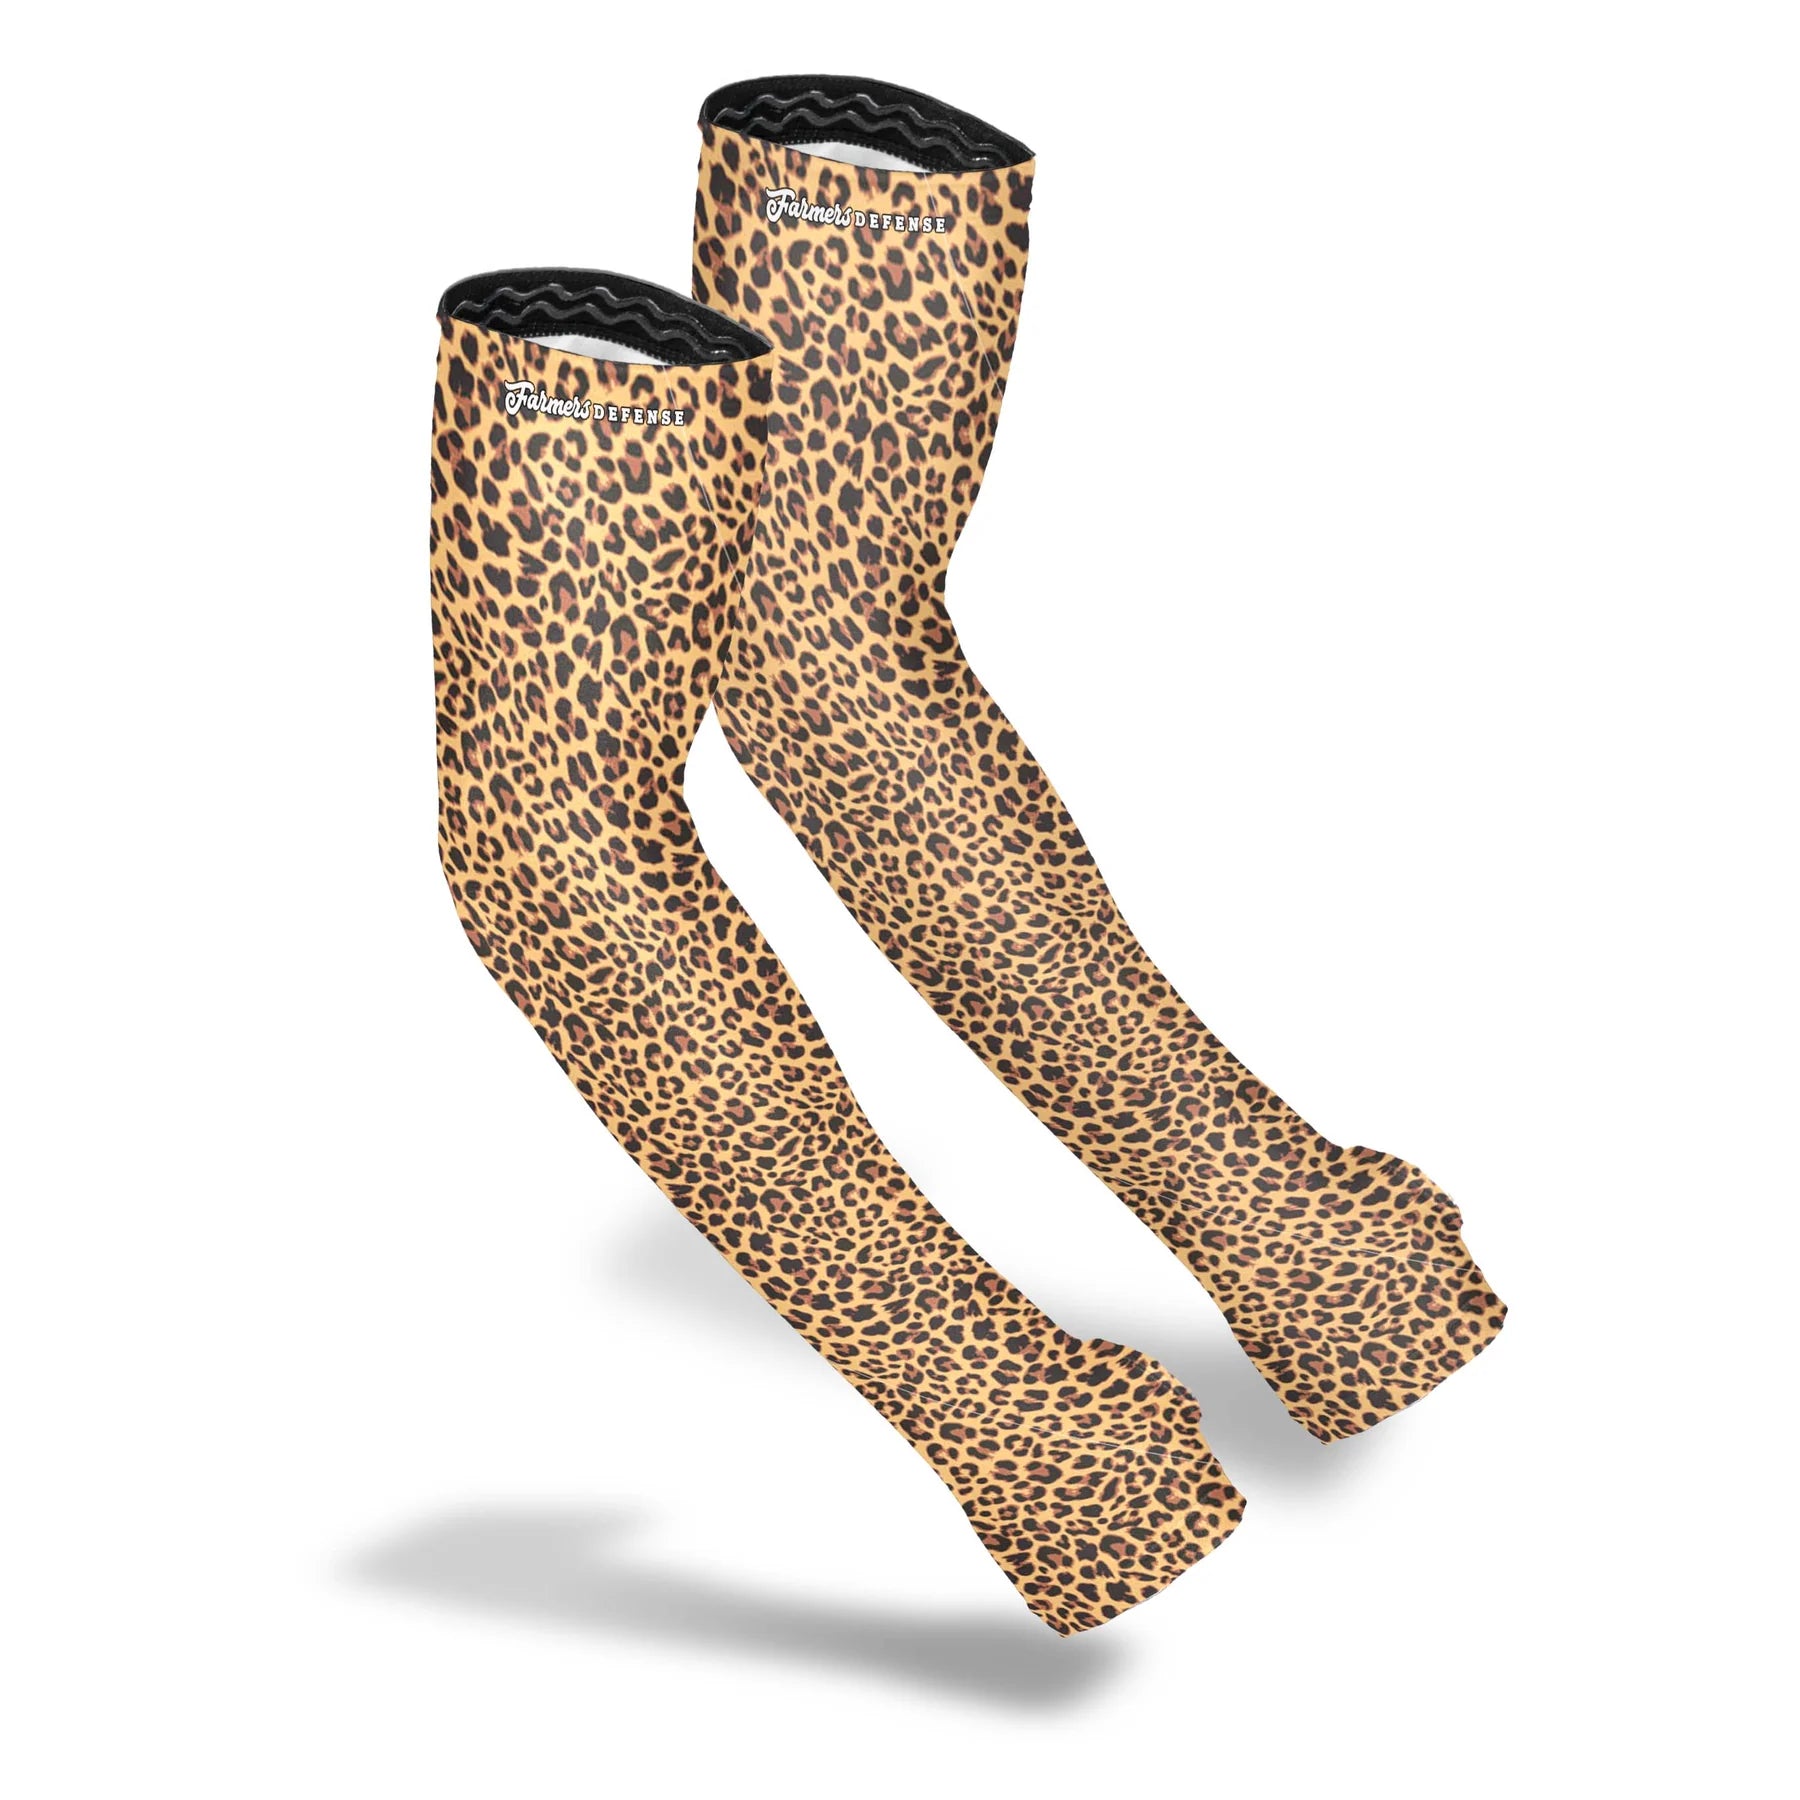 Leopard print stretchy arm protection sleeves for gardening by Farmers Defense